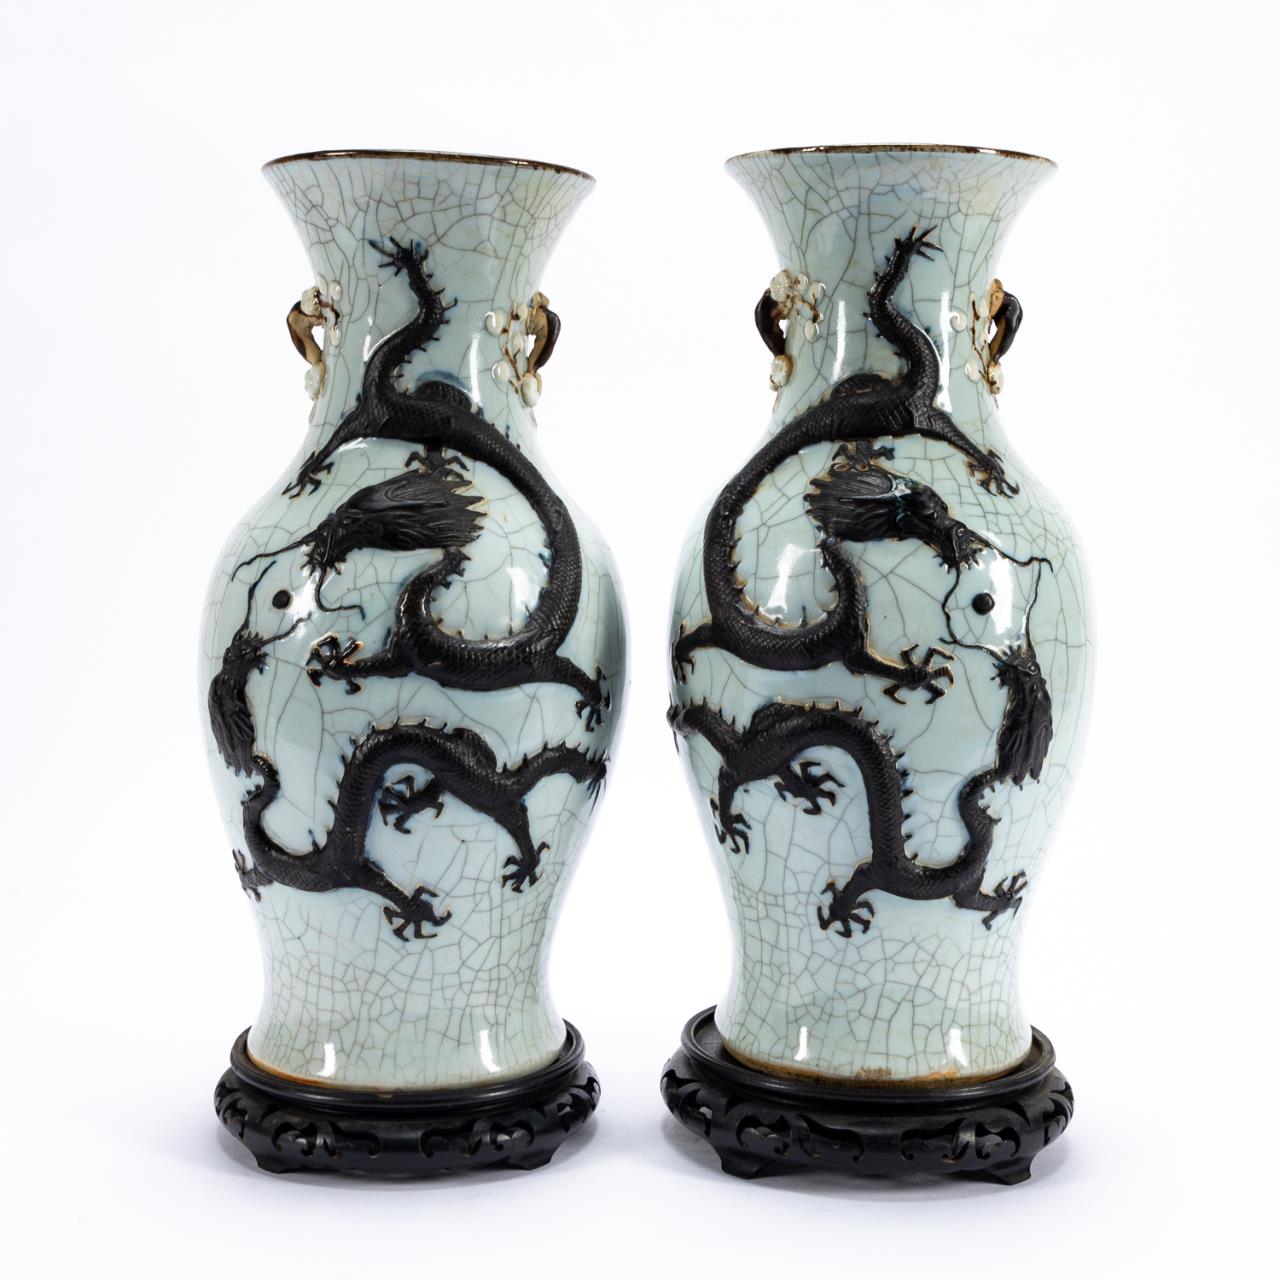 PAIR CHINESE CRACKLE GLAZE DRAGONS 35aa1e